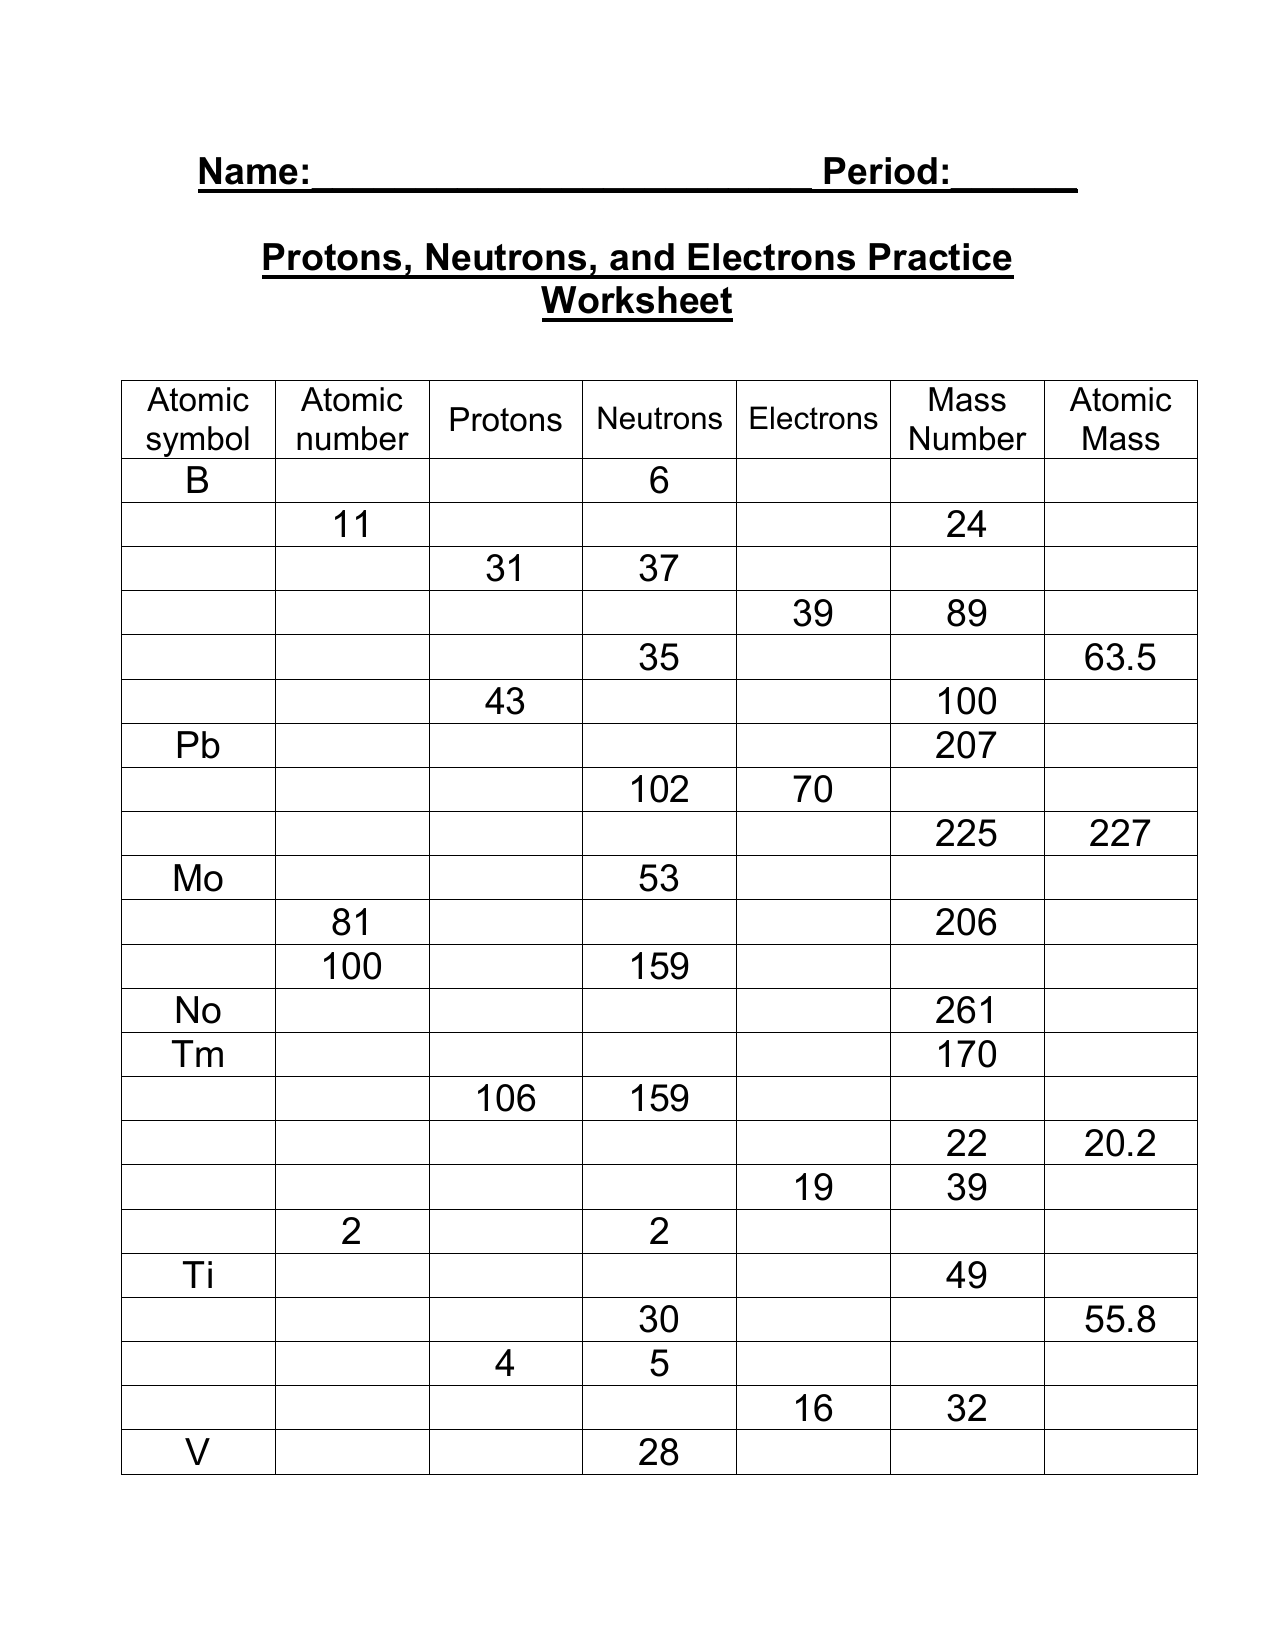 Atomic Number Worksheet For Protons Neutrons And Electrons Worksheet